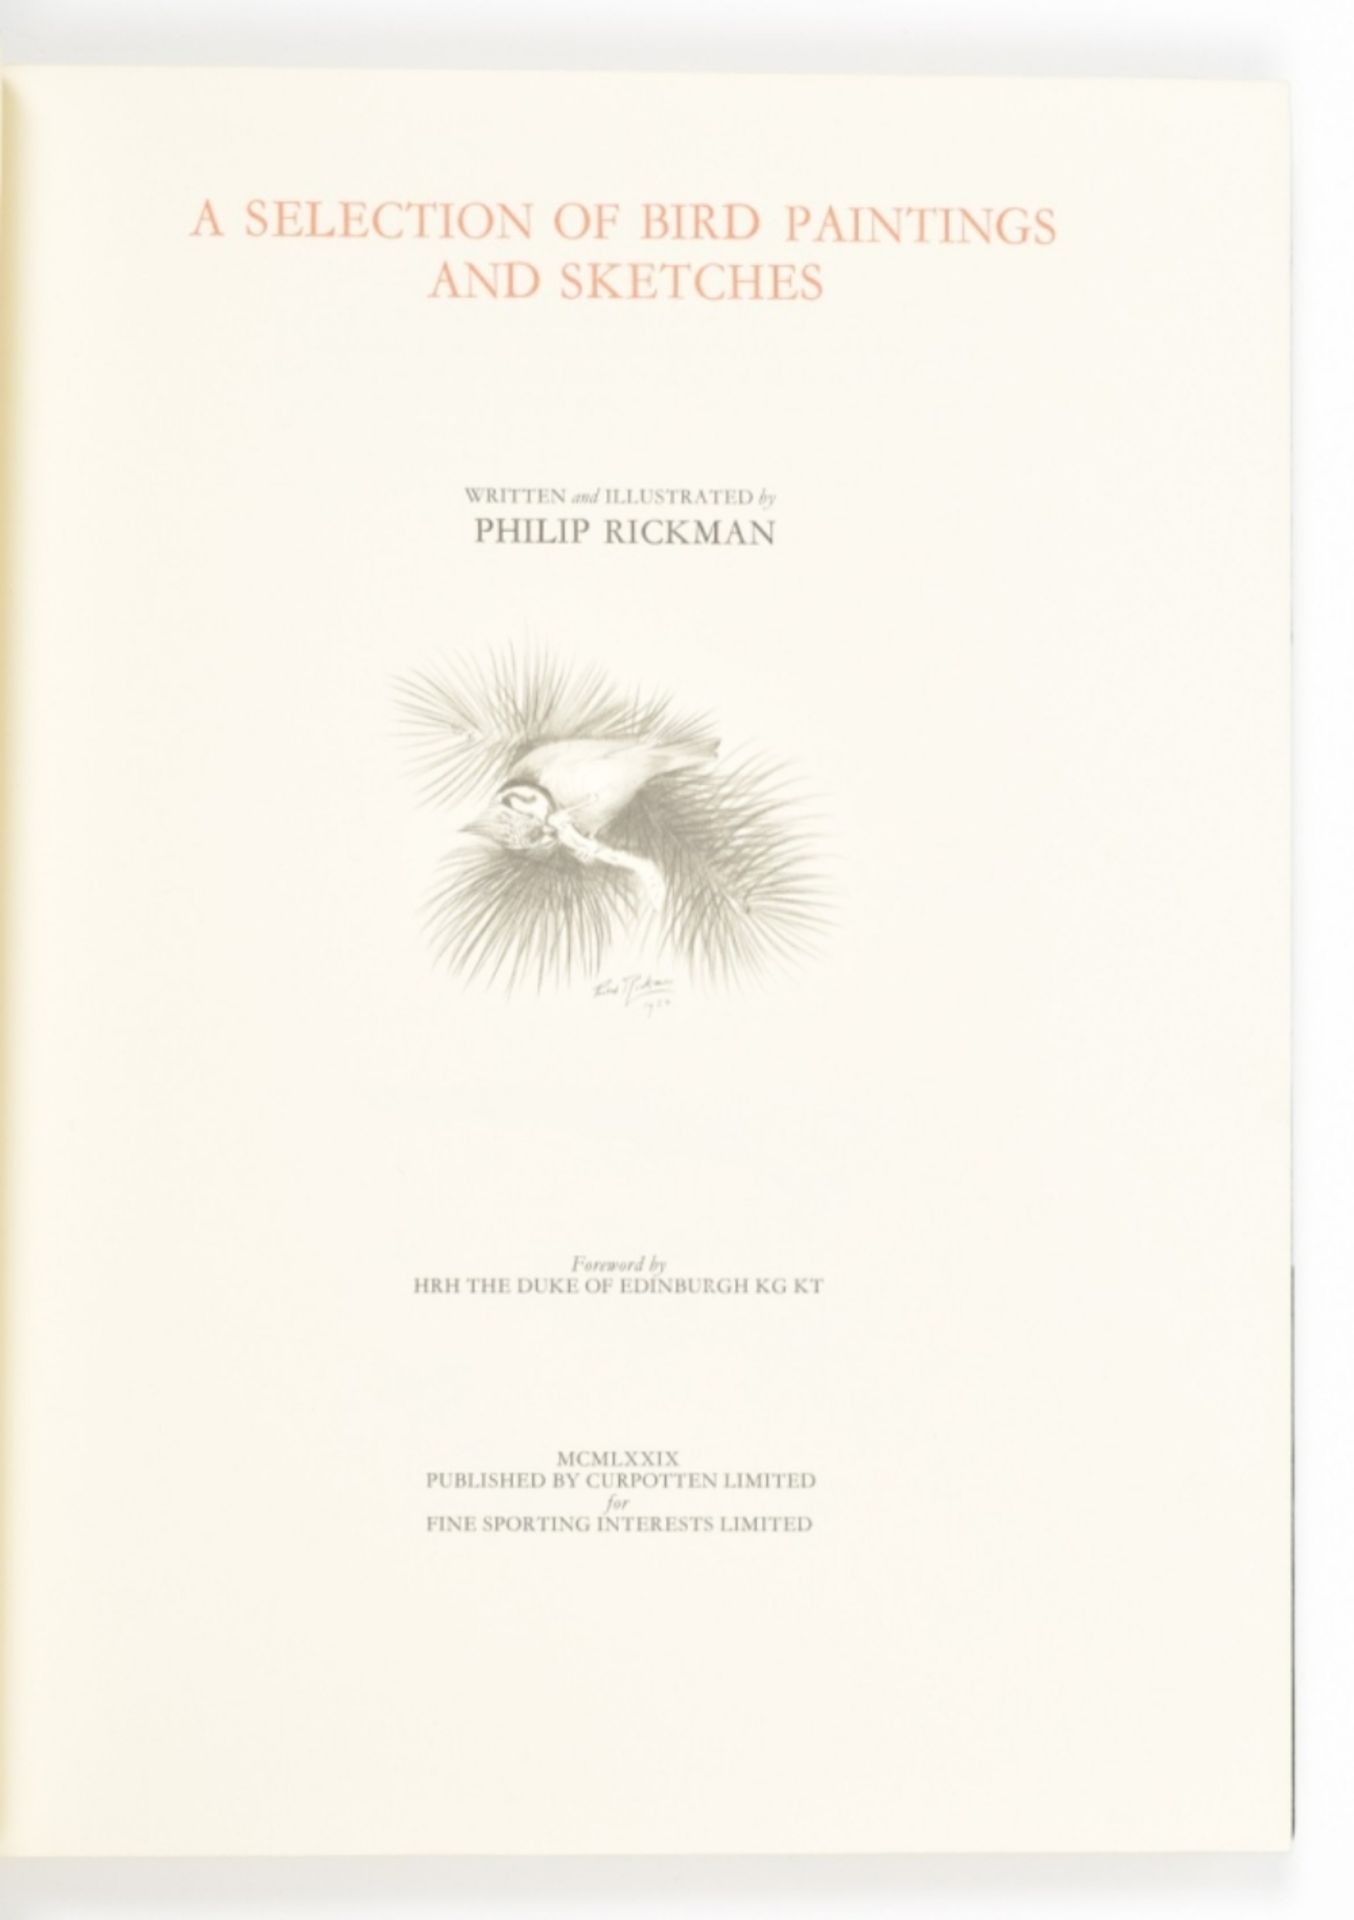 Philip Rickman. Bird Paintings and Sketches - Image 5 of 10